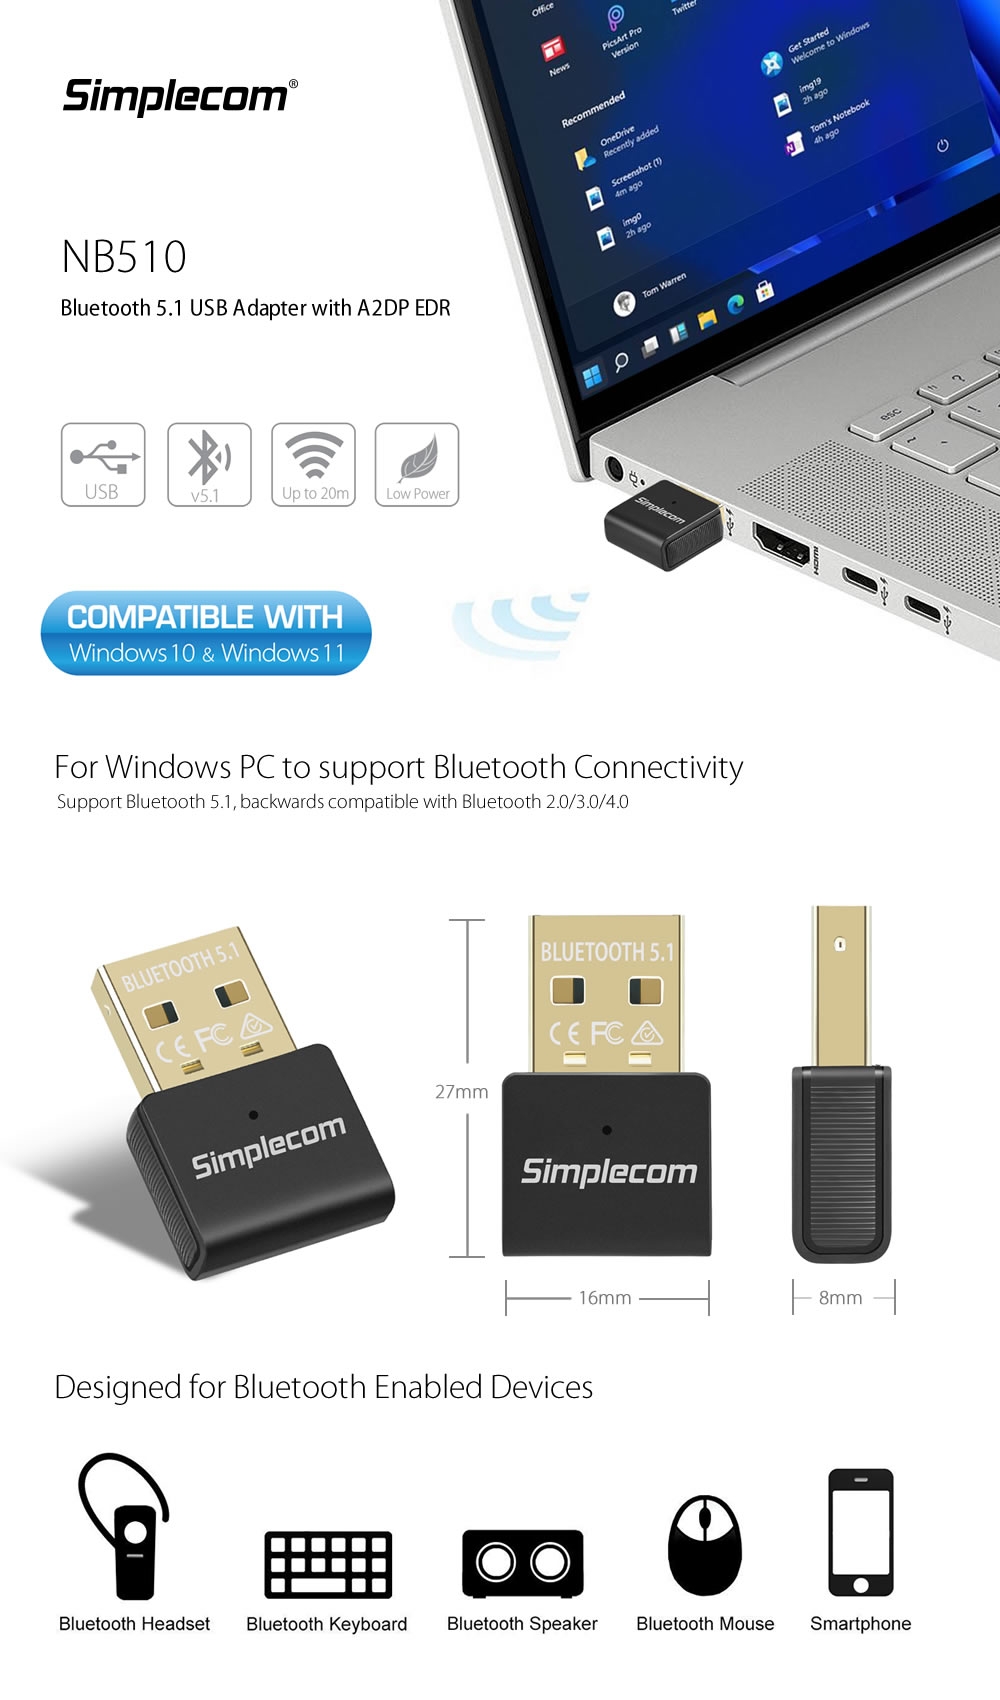 A large marketing image providing additional information about the product Simplecom NB510 USB Bluetooth 5.1 Adapter - Additional alt info not provided